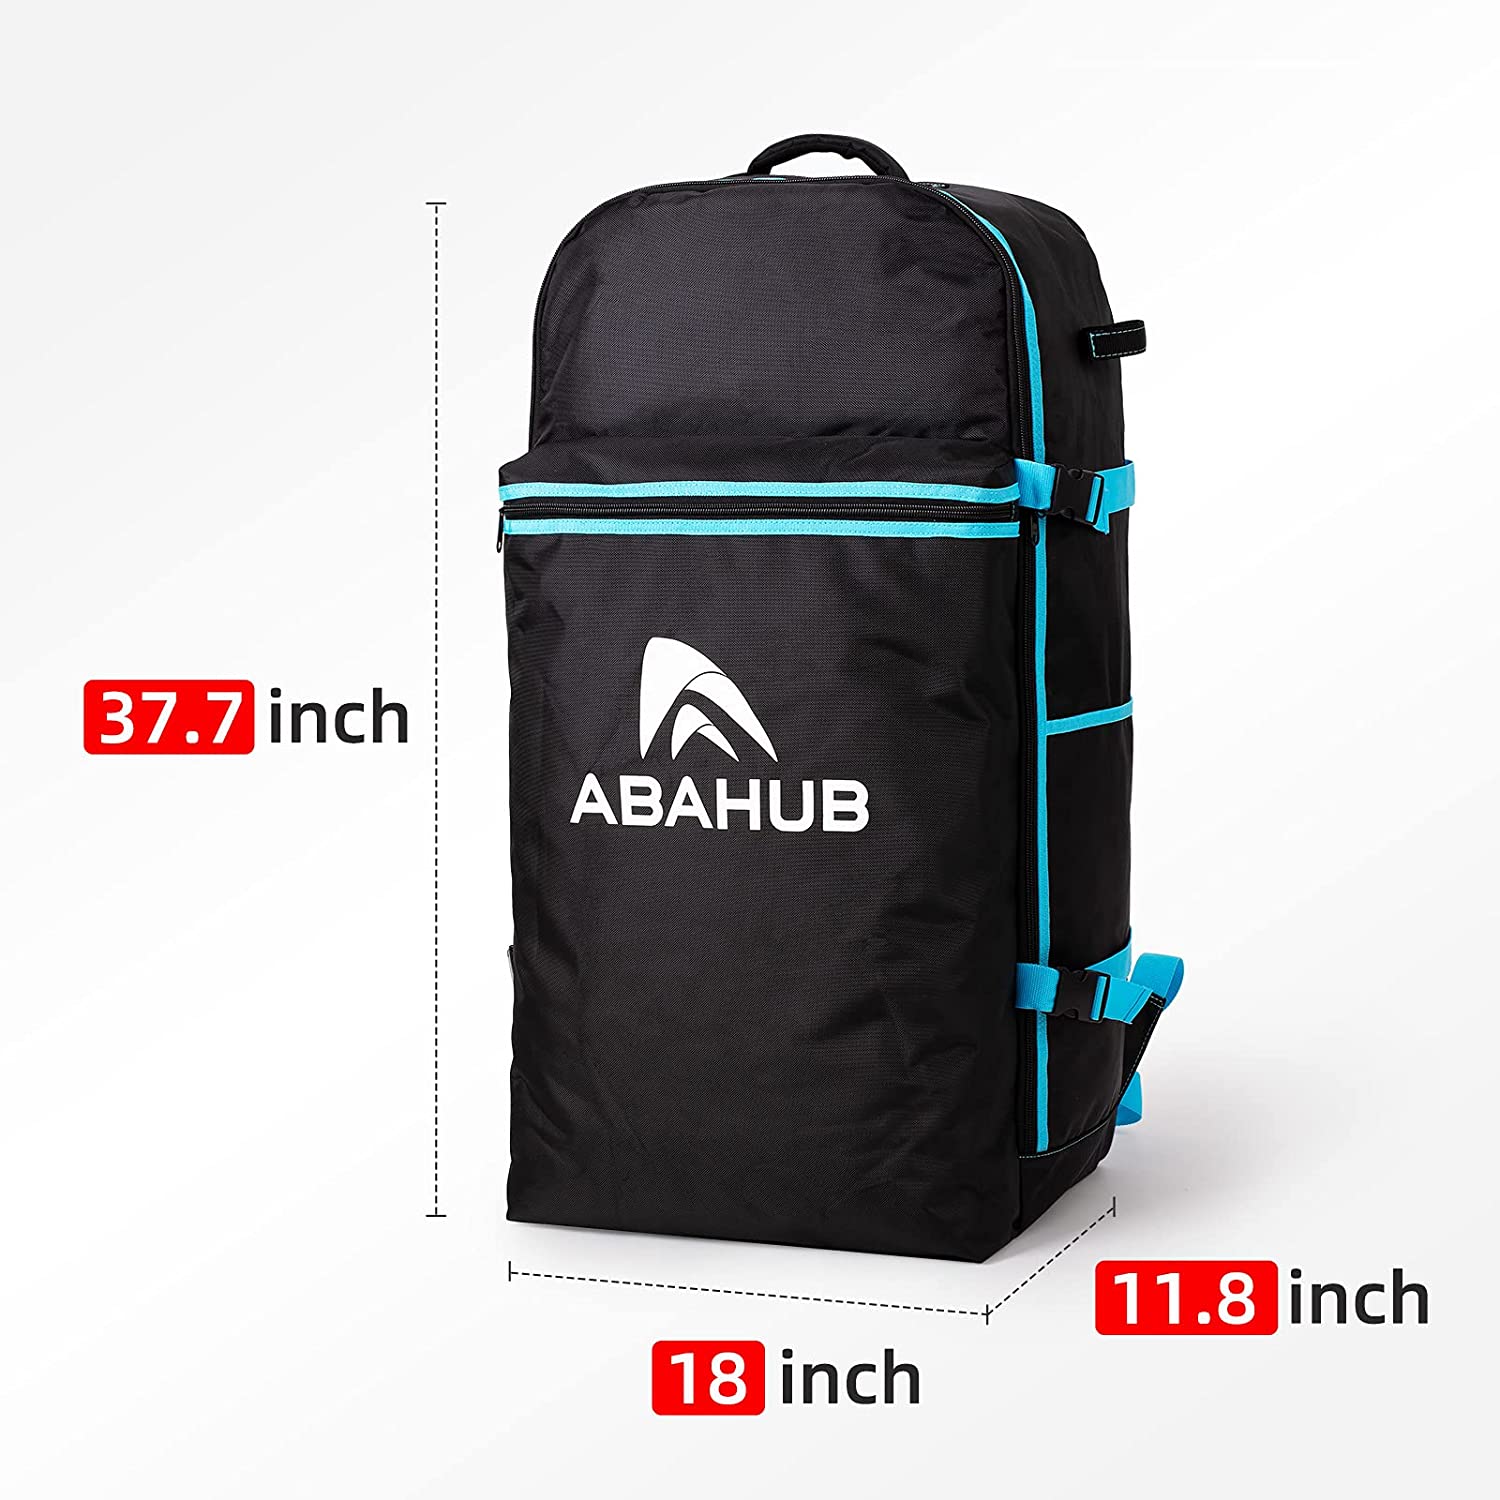 Abahub Premium Isup Bag Travel Carrying Backpack Inflatable Stand Paddleboards Paddle Board Accessories Fits 12-1